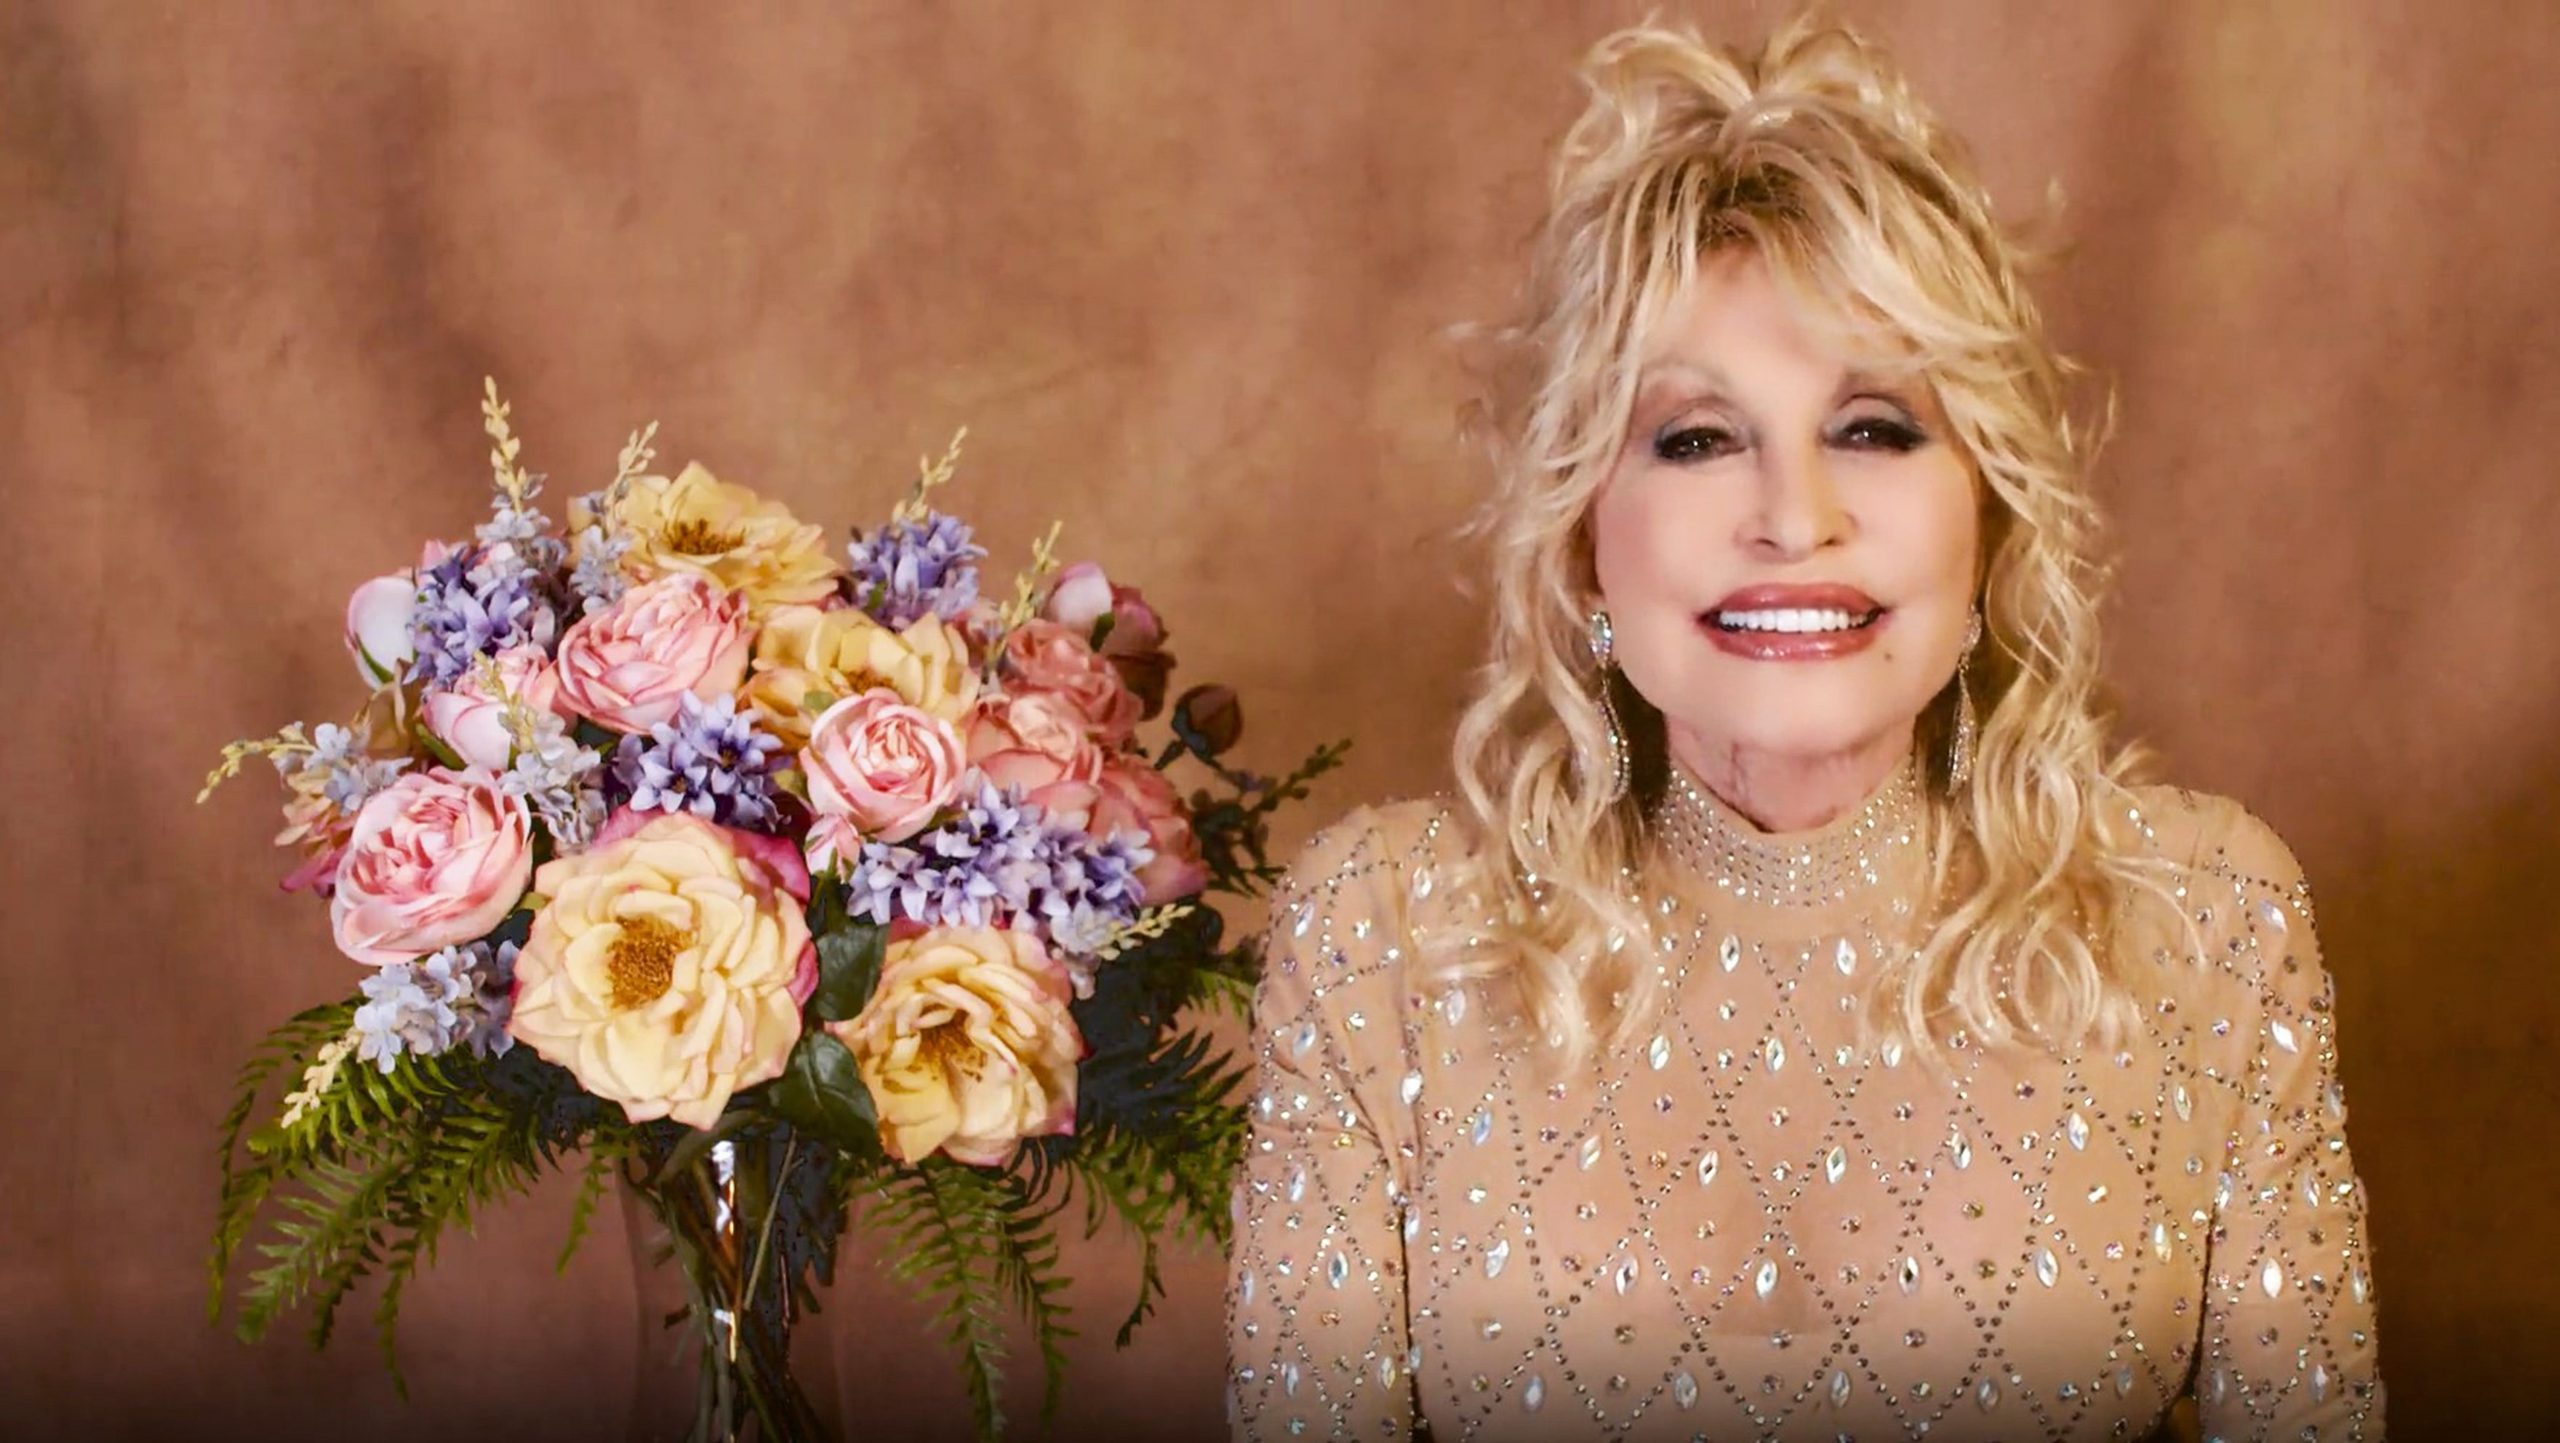 Dolly Parton Opens Up About Her Big Break in Hollywood Sounds Like